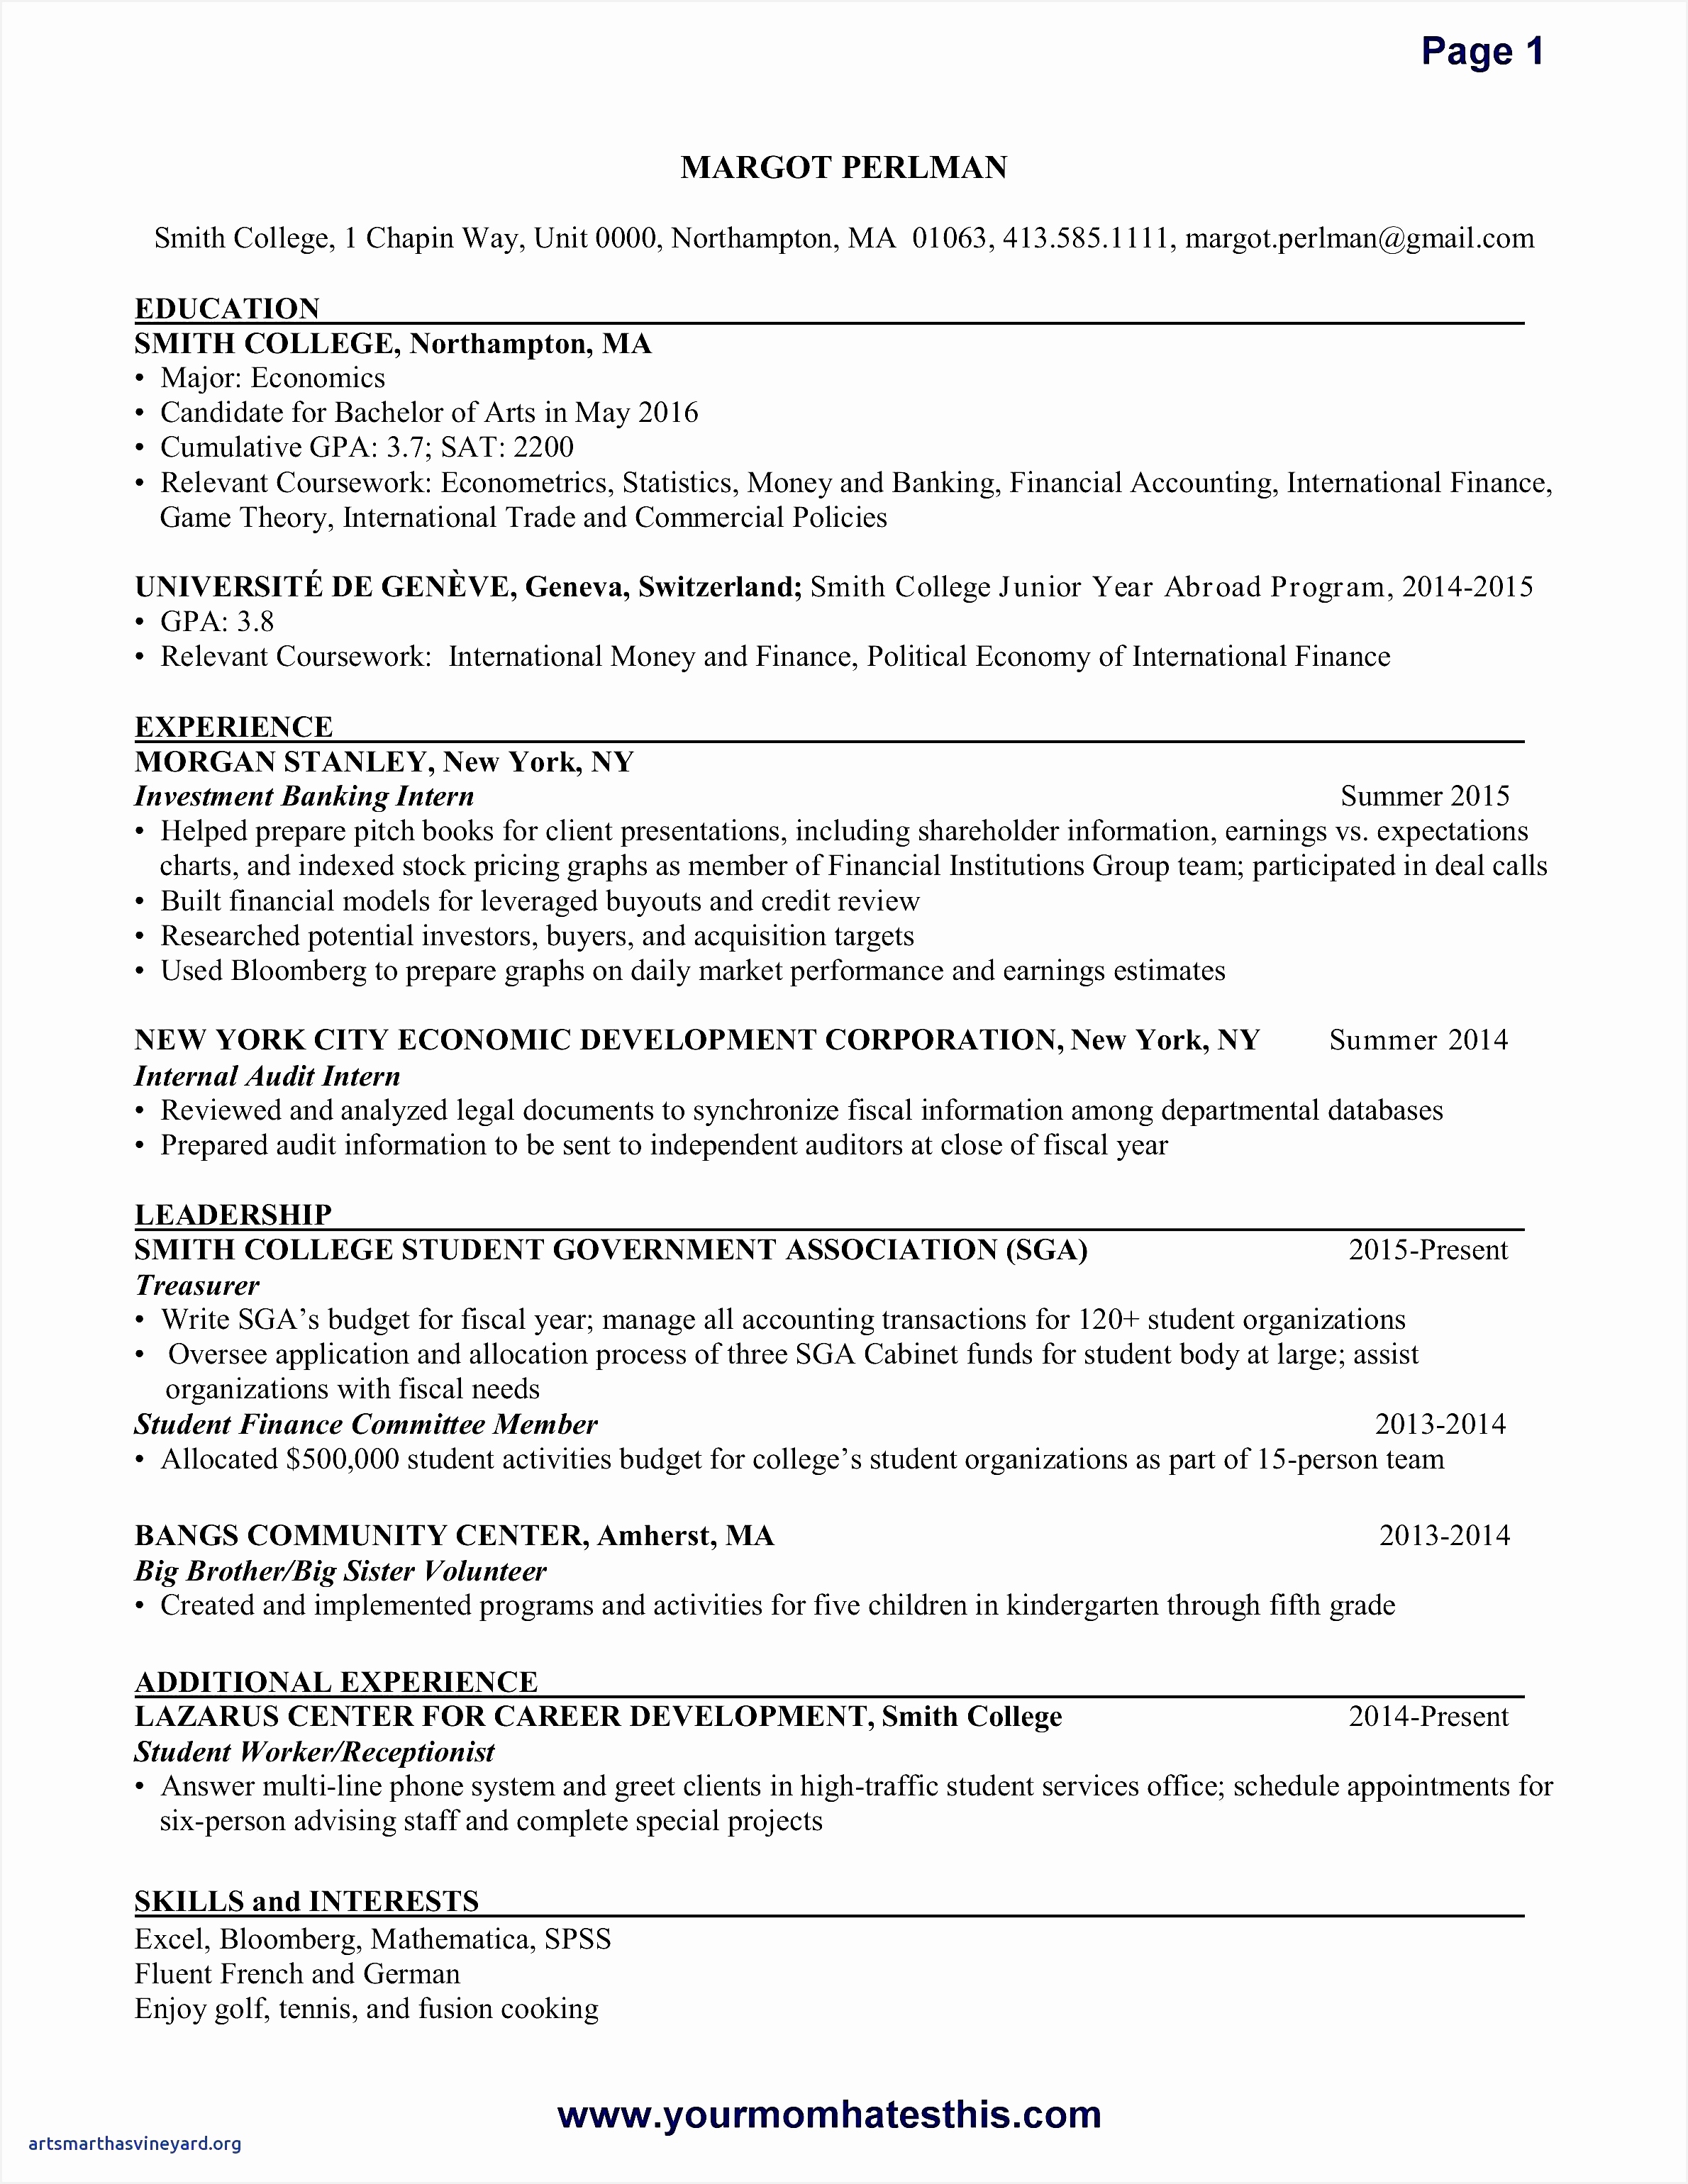 20 Retail Resume No Experience Elegant How to Write Resume for Internship with No Experience30802380